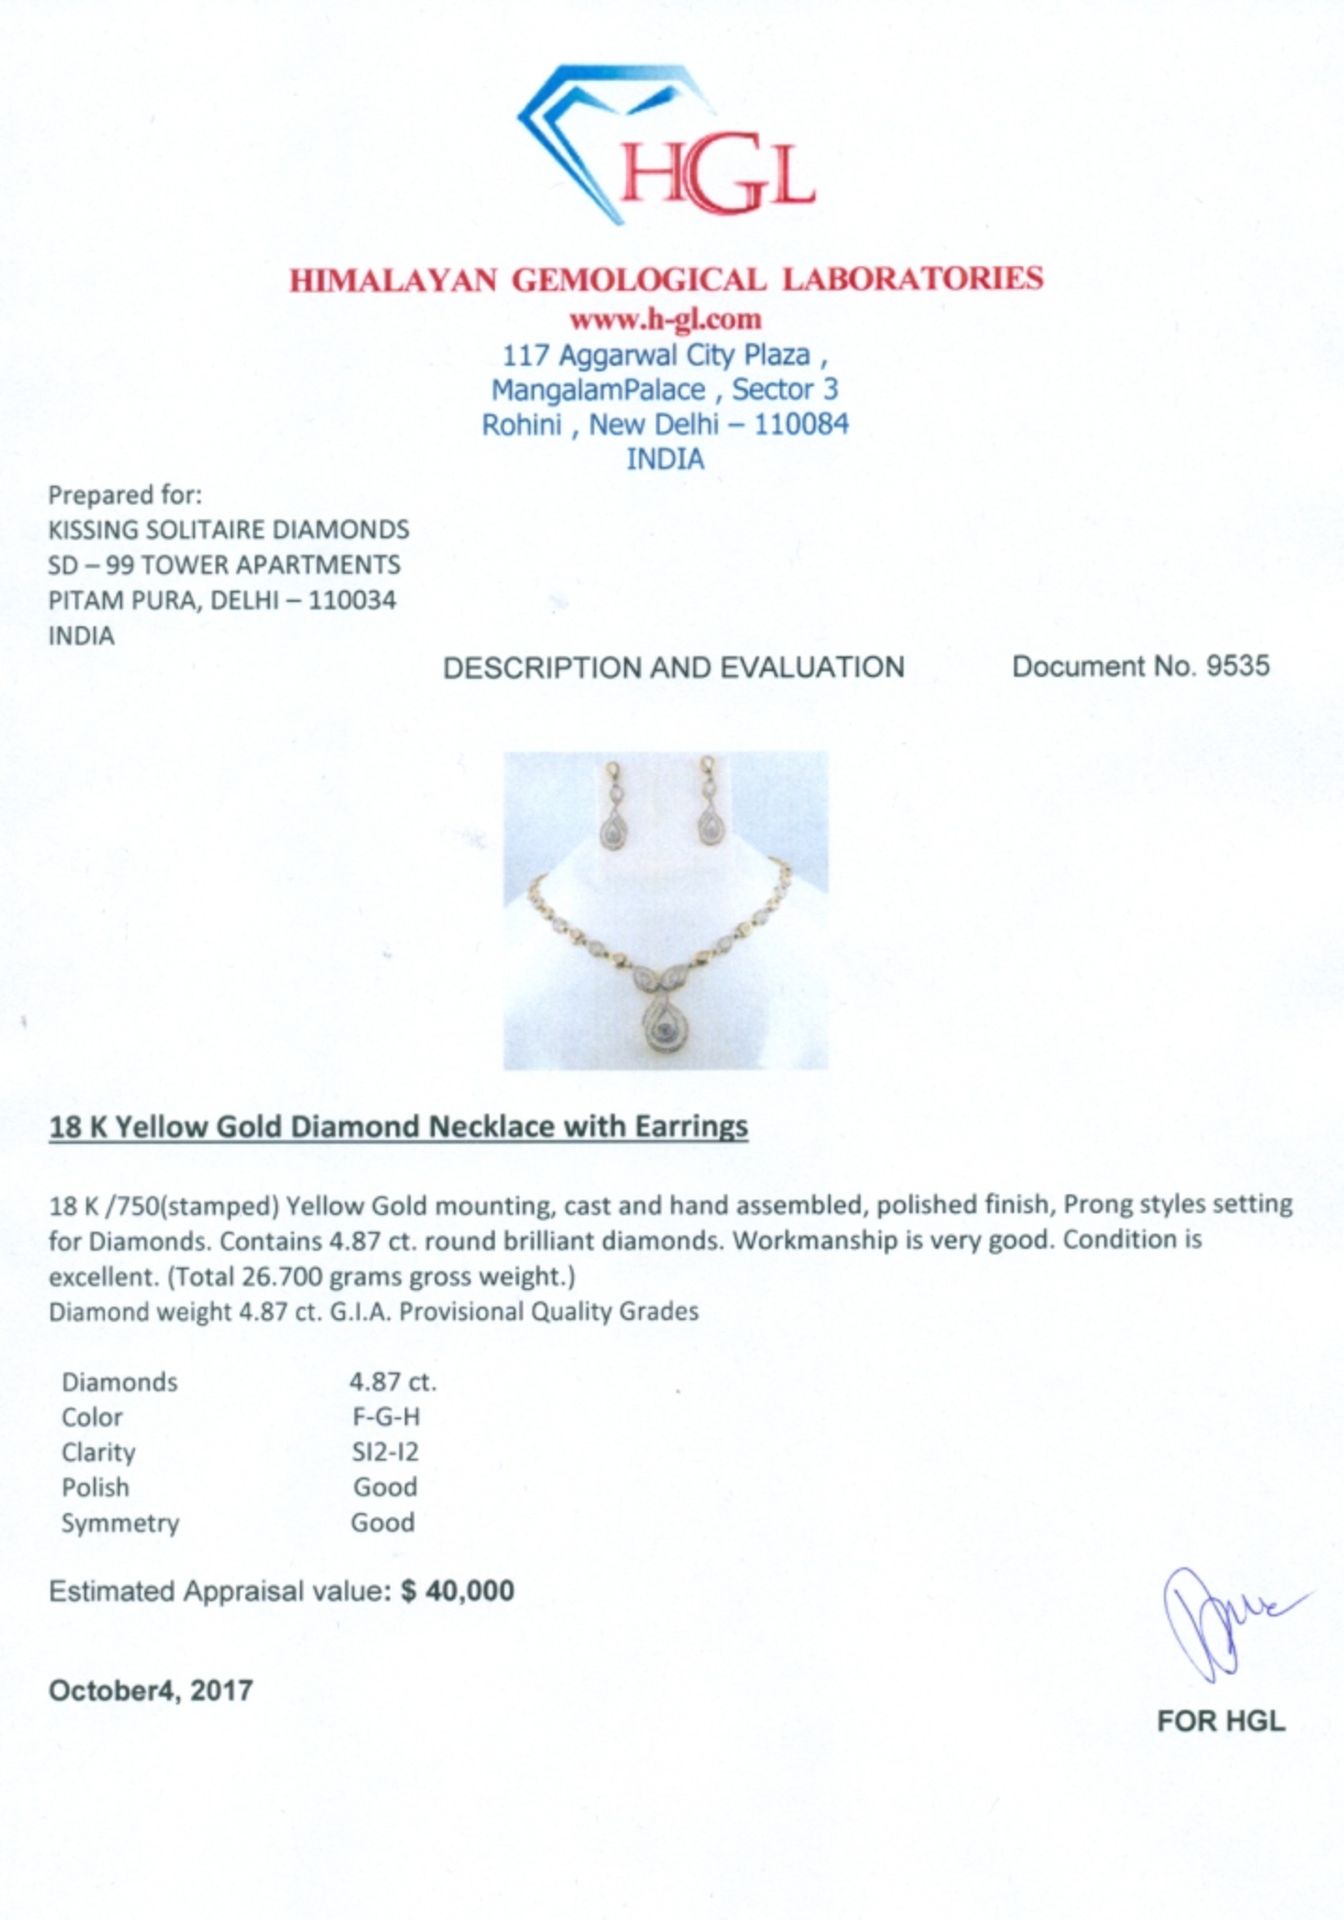 IGI Certified 14 K / 585 Yellow Gold Diamond Necklace with matching Earrings - Image 9 of 9